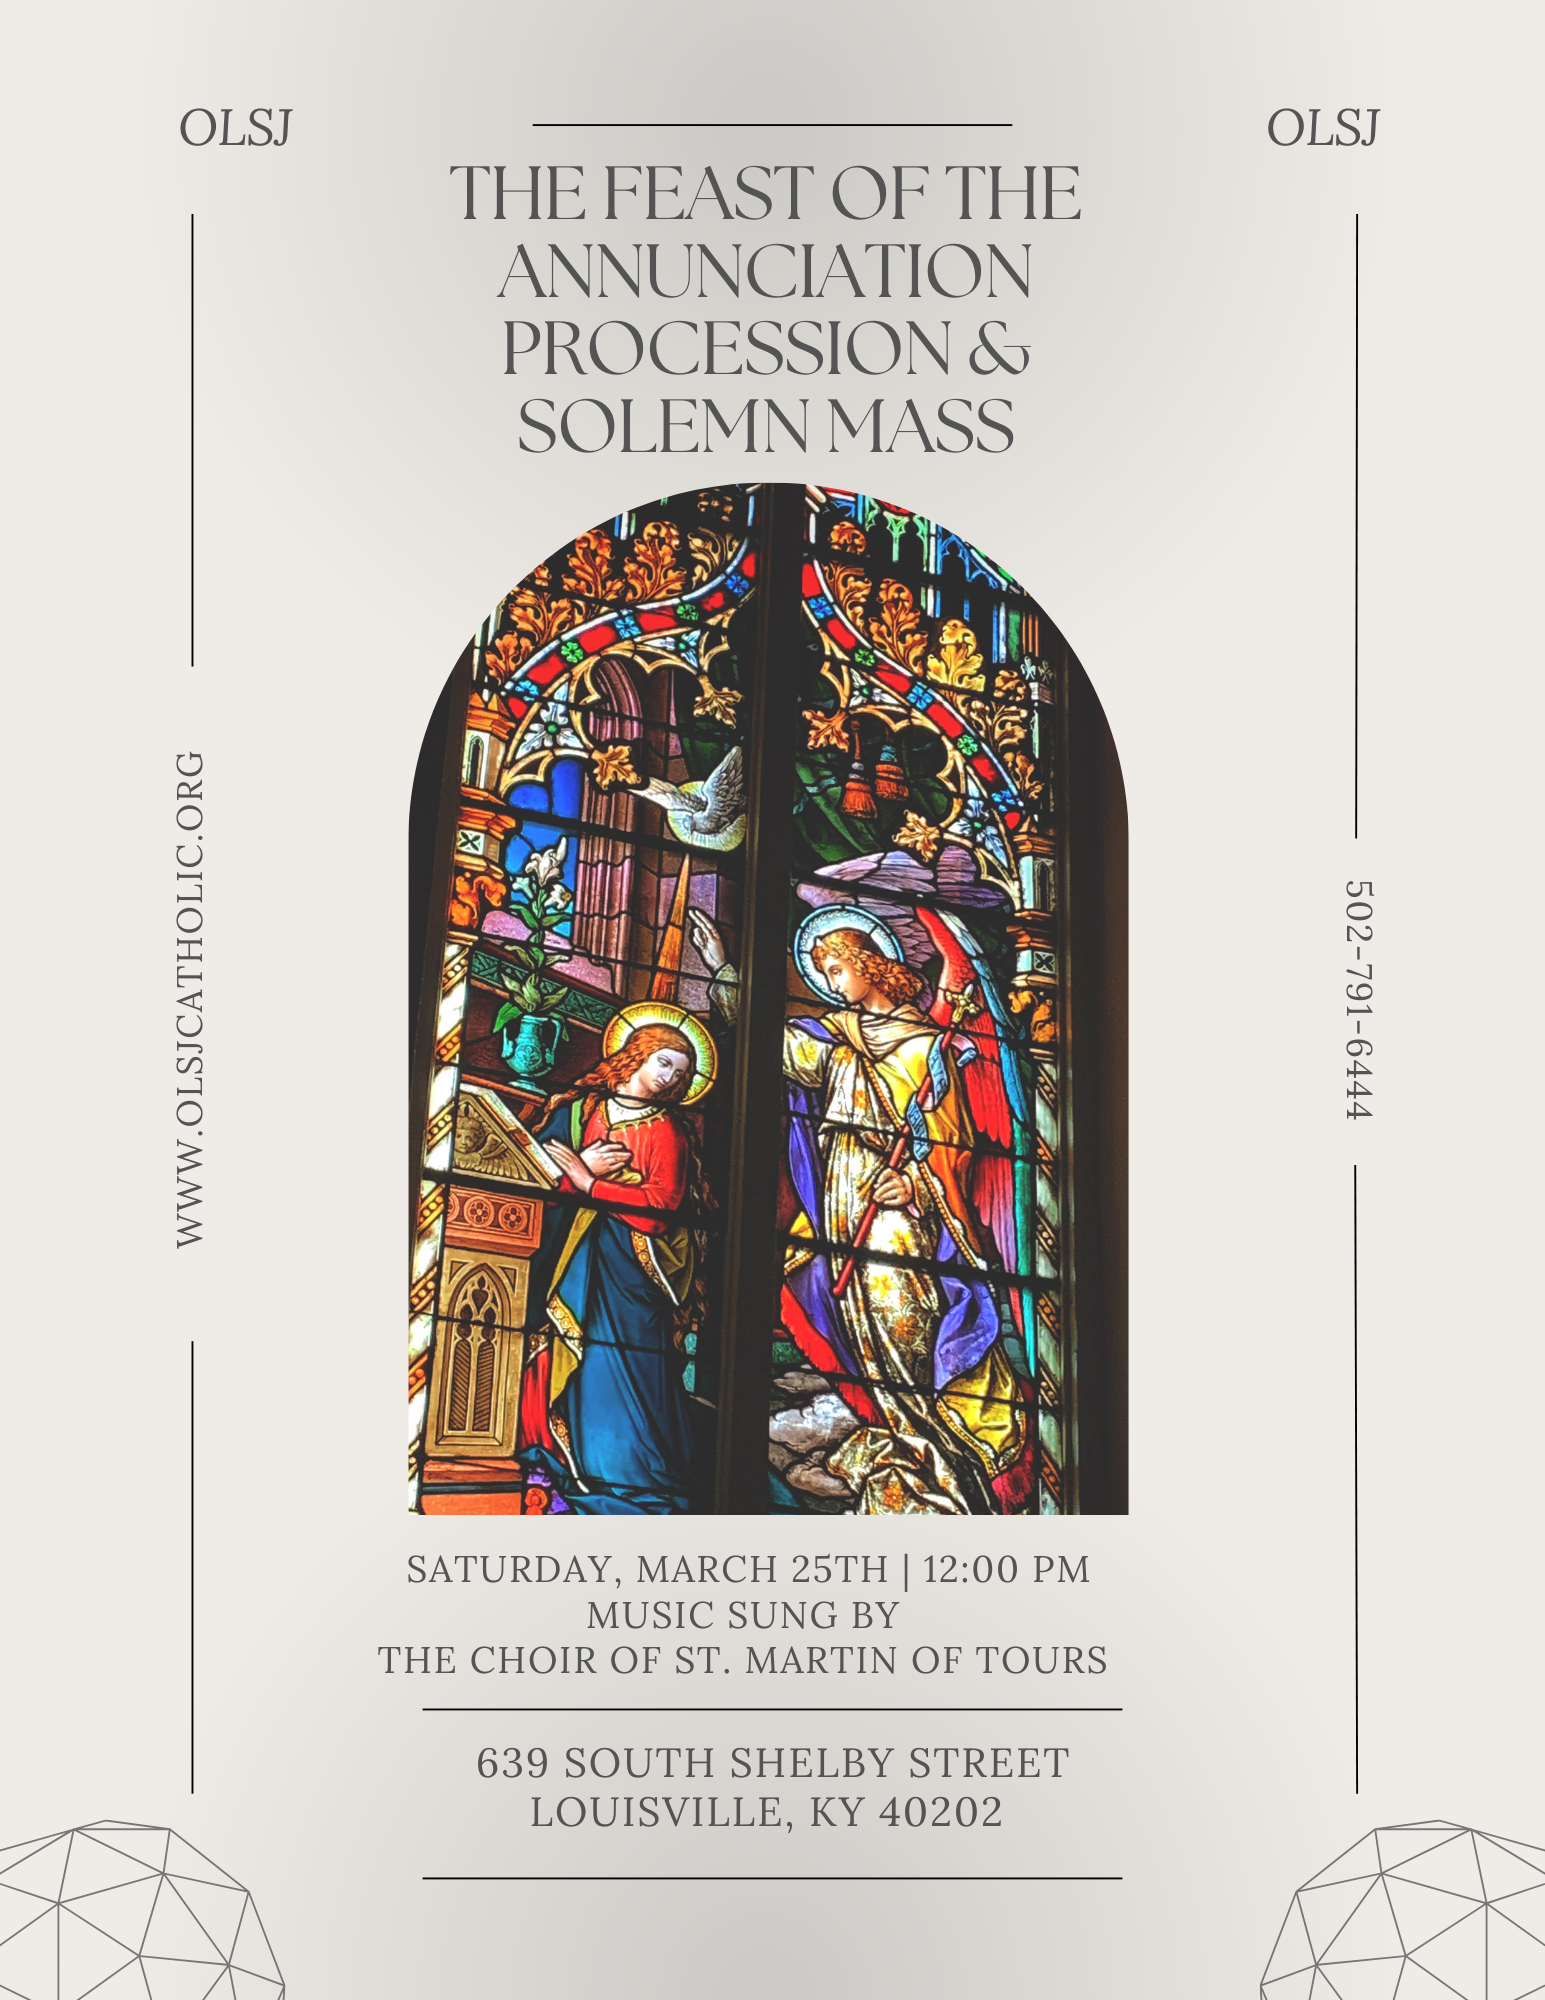 New Liturgical Movement: Ordinariate Mass of the Annunciation in 